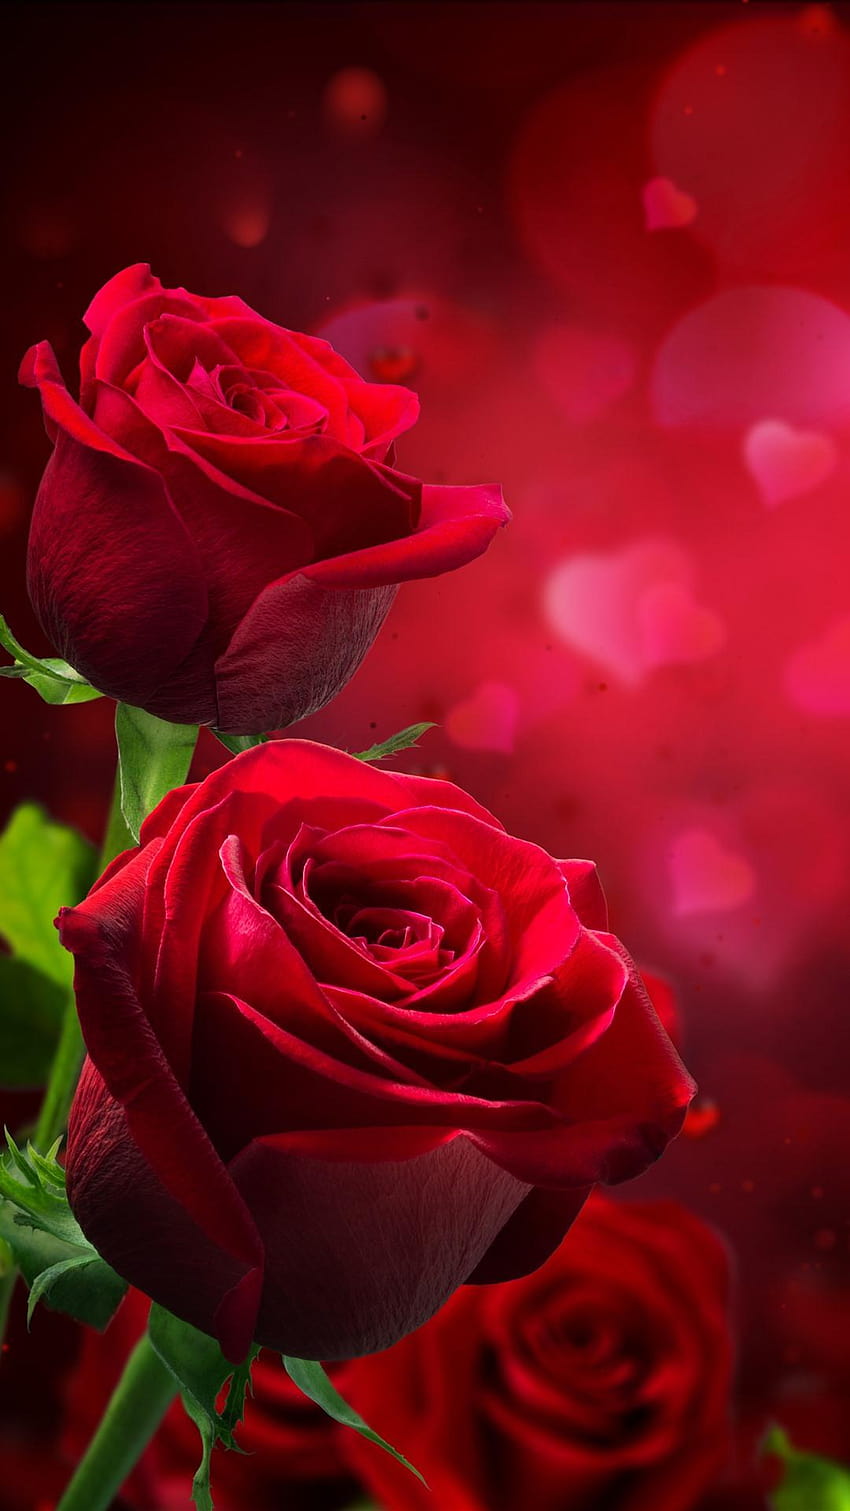 Beautiful love roses images: An incredible collection of over 999 ...